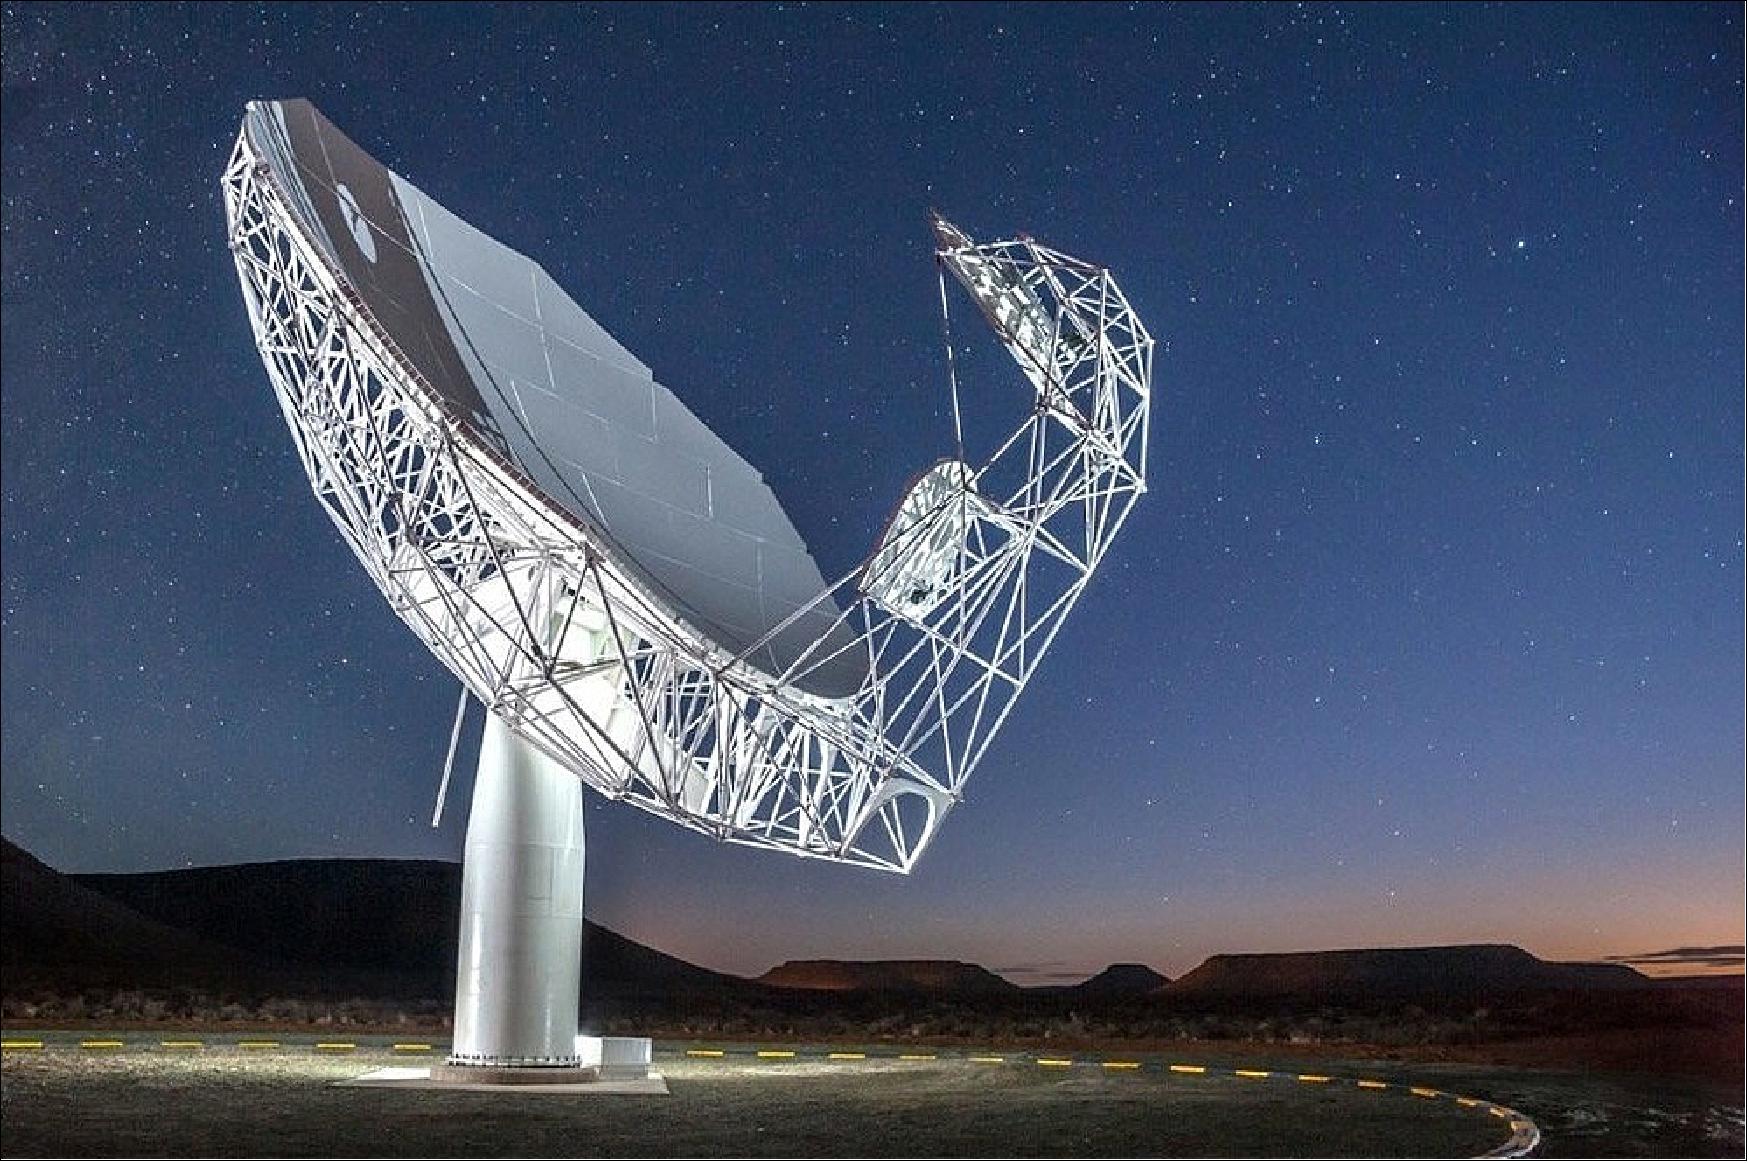 Figure 85: On March 27th 2014, the first General Dynamics-built antenna for the MeerKAT radio telescope was launched in South Africa. When completed, the MeerKAT array will be the largest and most sensitive radio telescope in the southern hemisphere (image credit: SKA South Africa)